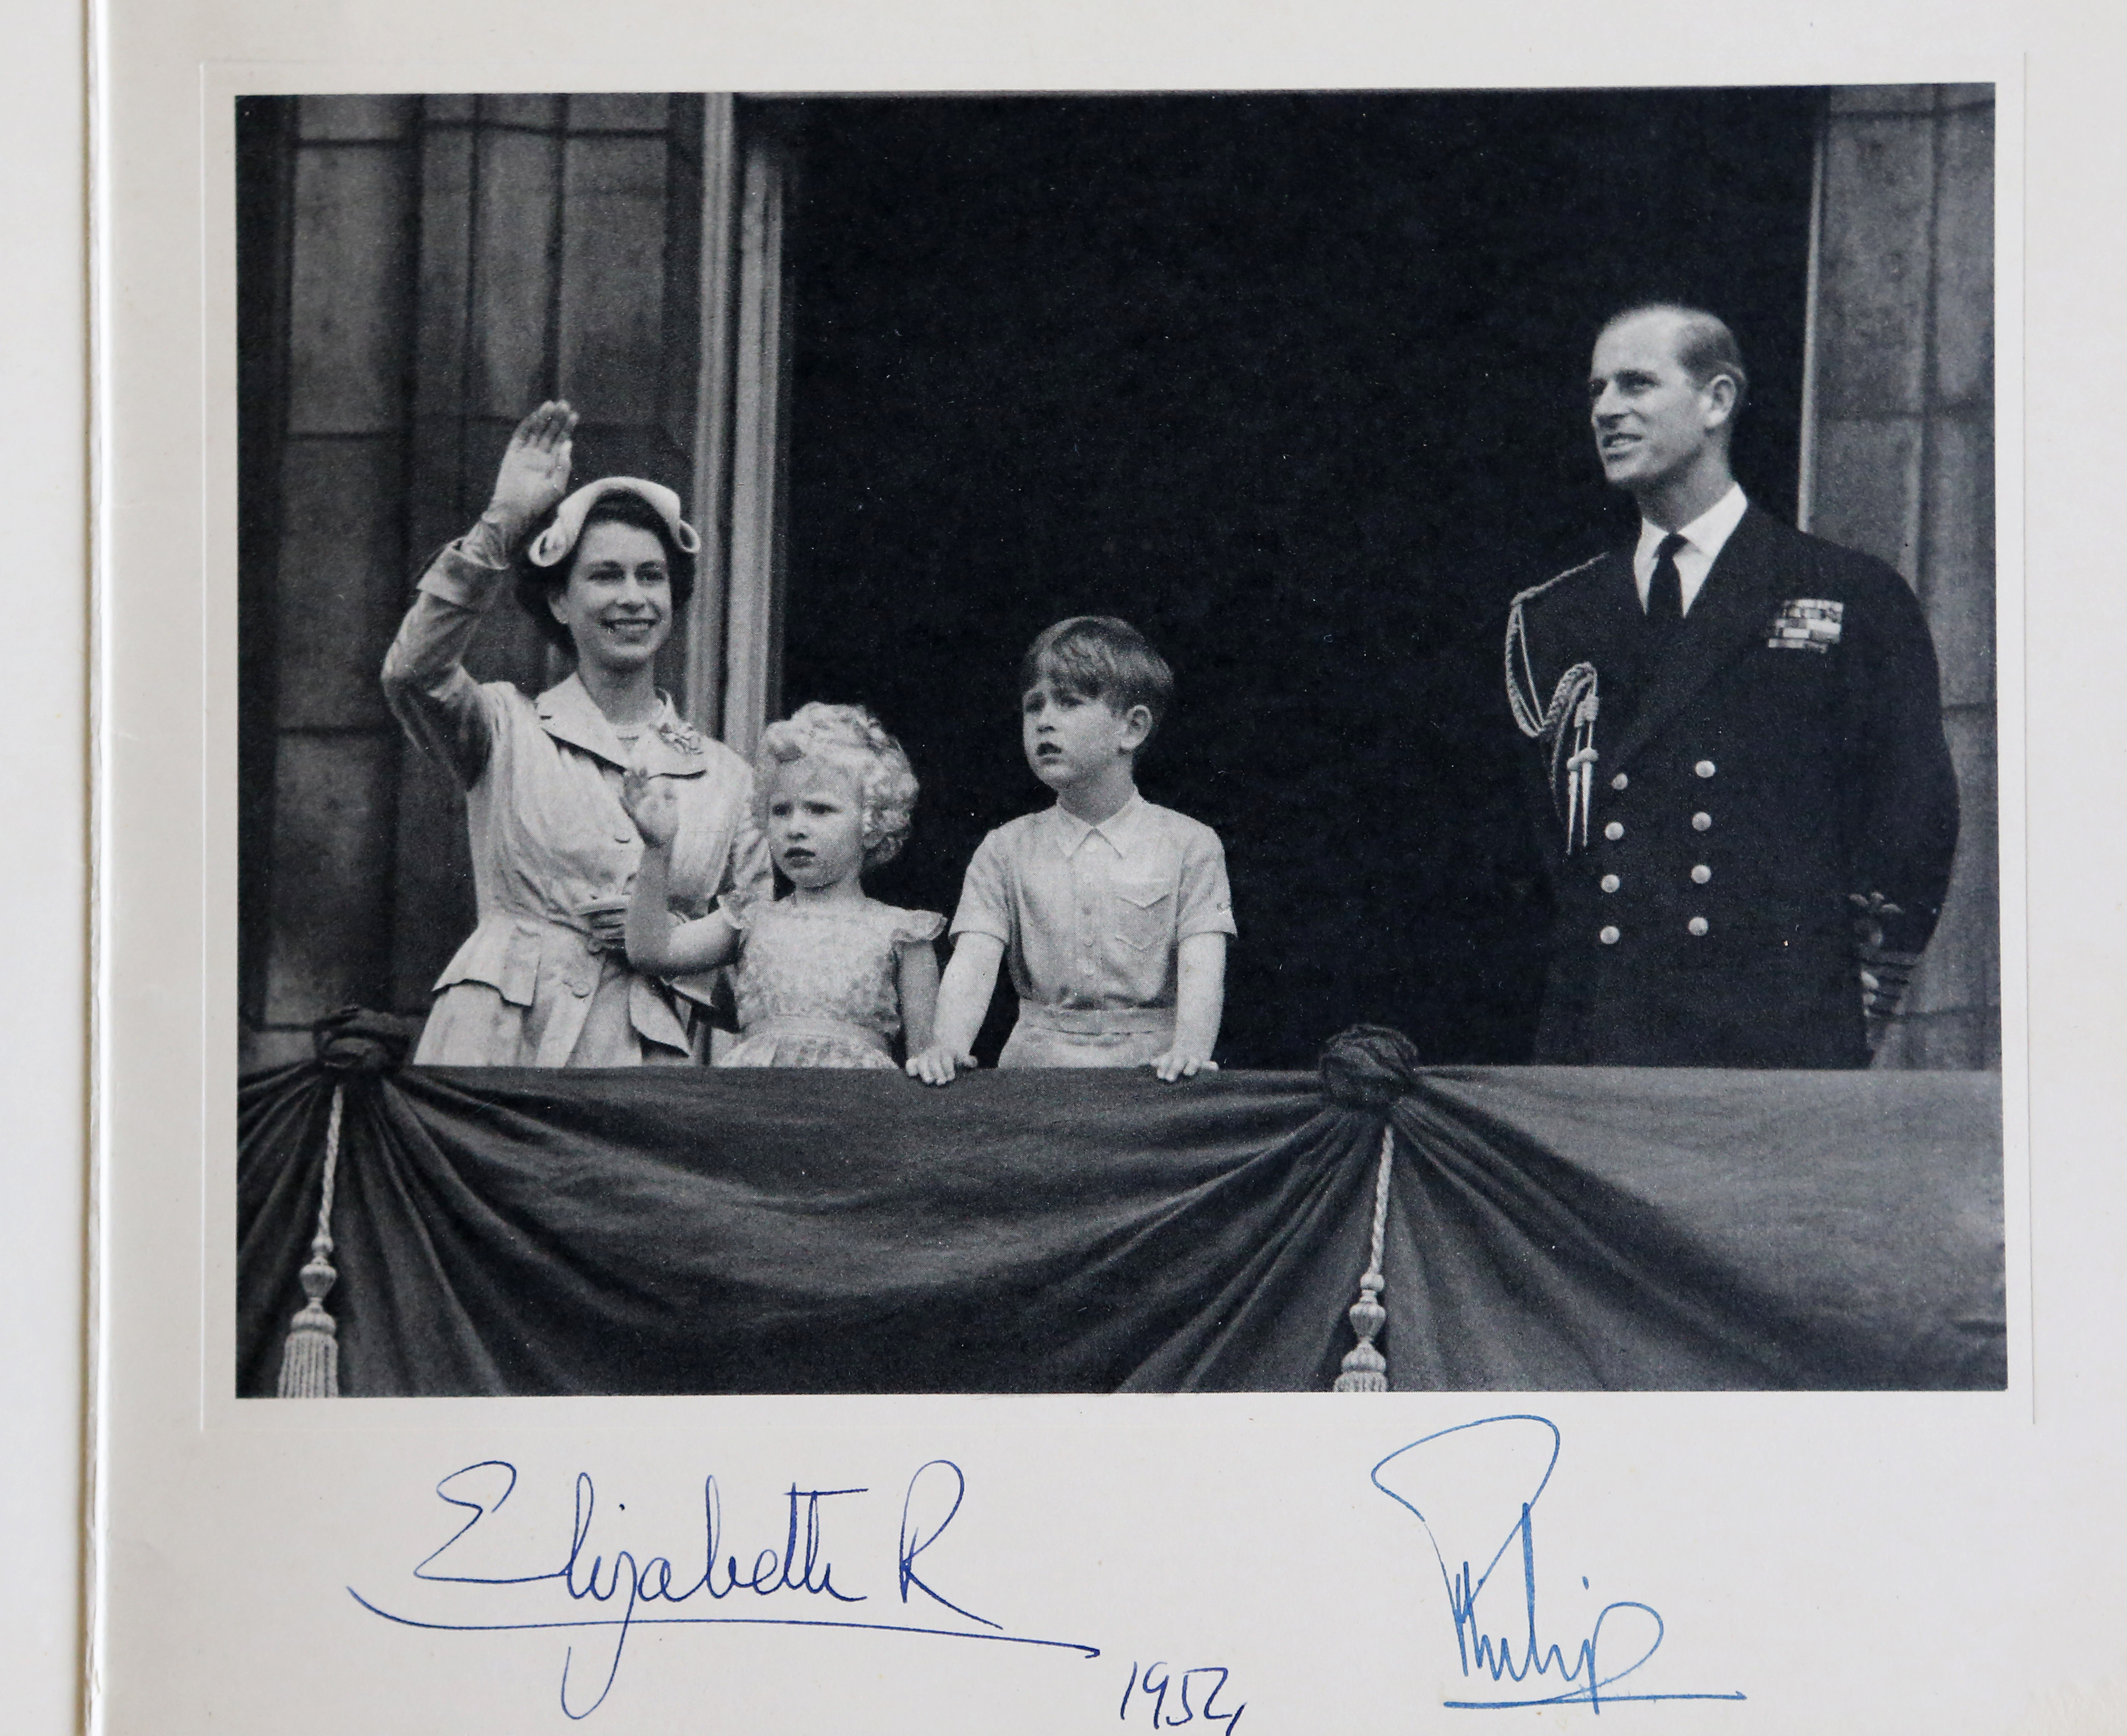 1952 Royal Christmas Card.  Queen Elizabeth II and Philip, Duke of Edinburgh with their children Prince Charles and Princess Anne.